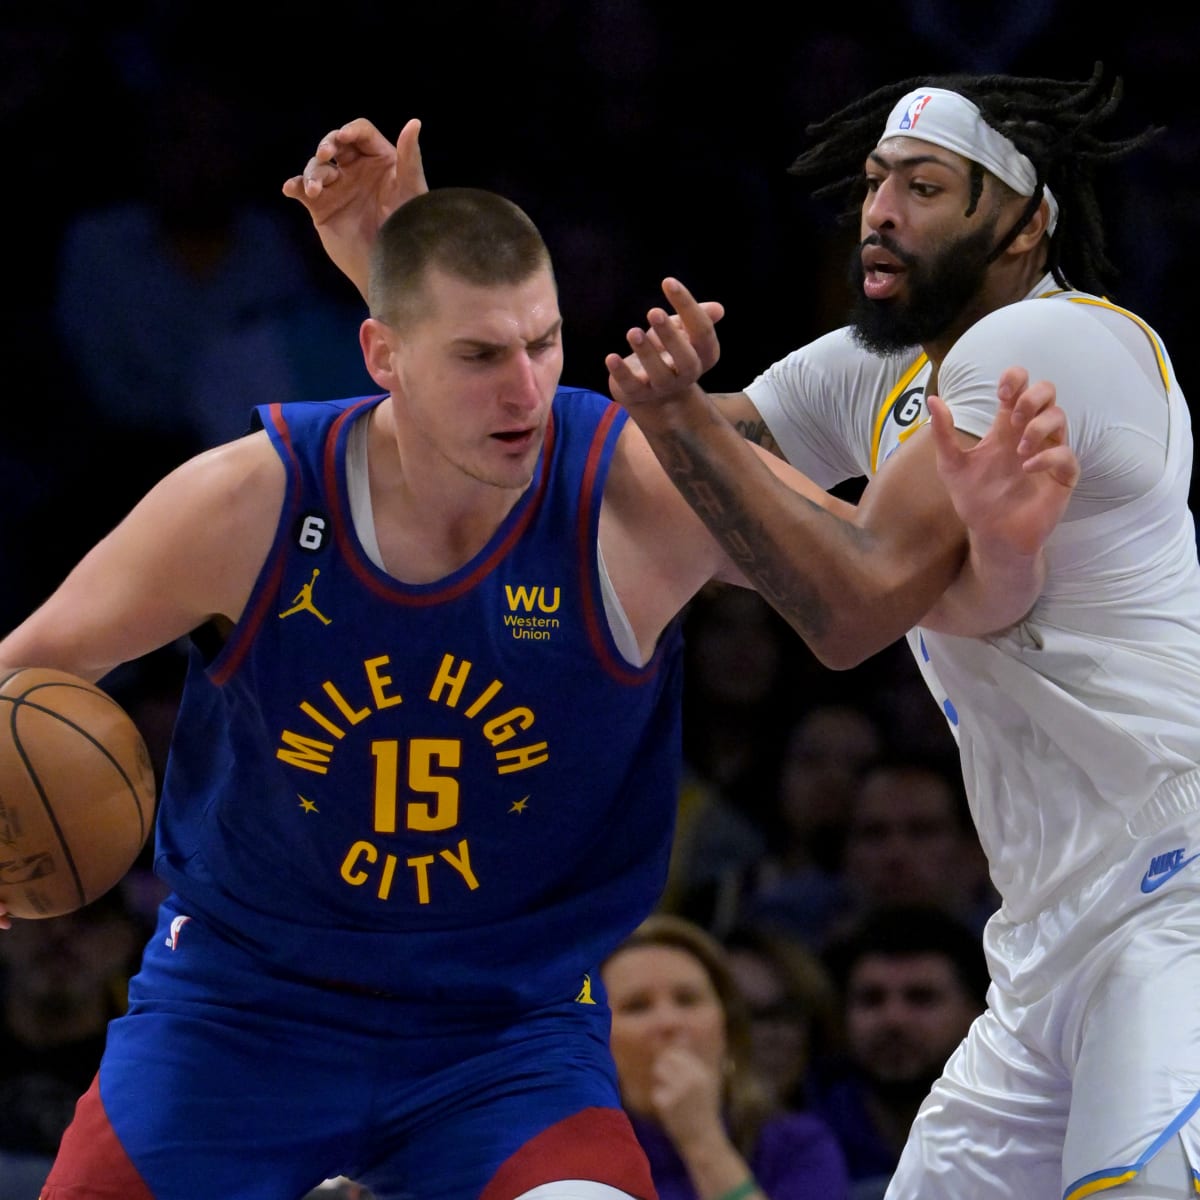 Los Angeles Lakers vs Denver Nuggets game 2: How to watch on TV and stream  online, NBA - AS USA